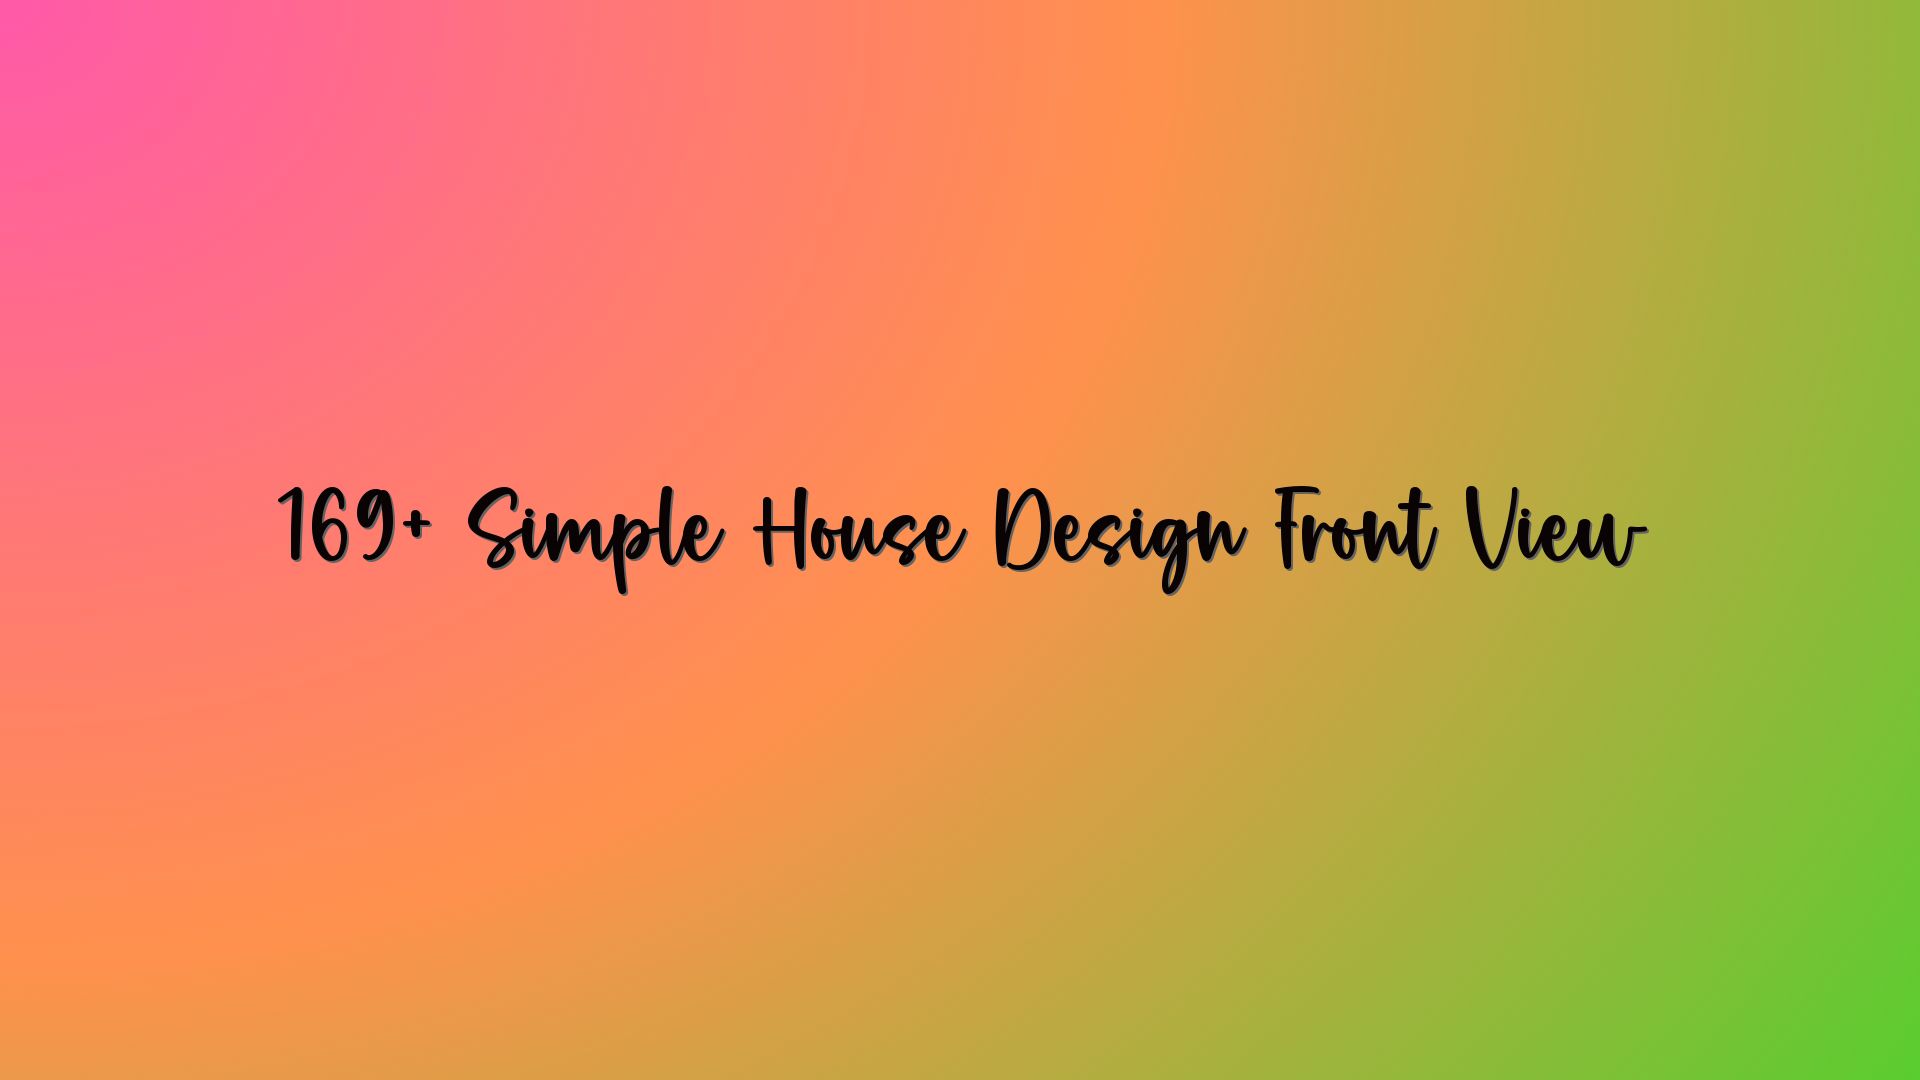 169+ Simple House Design Front View